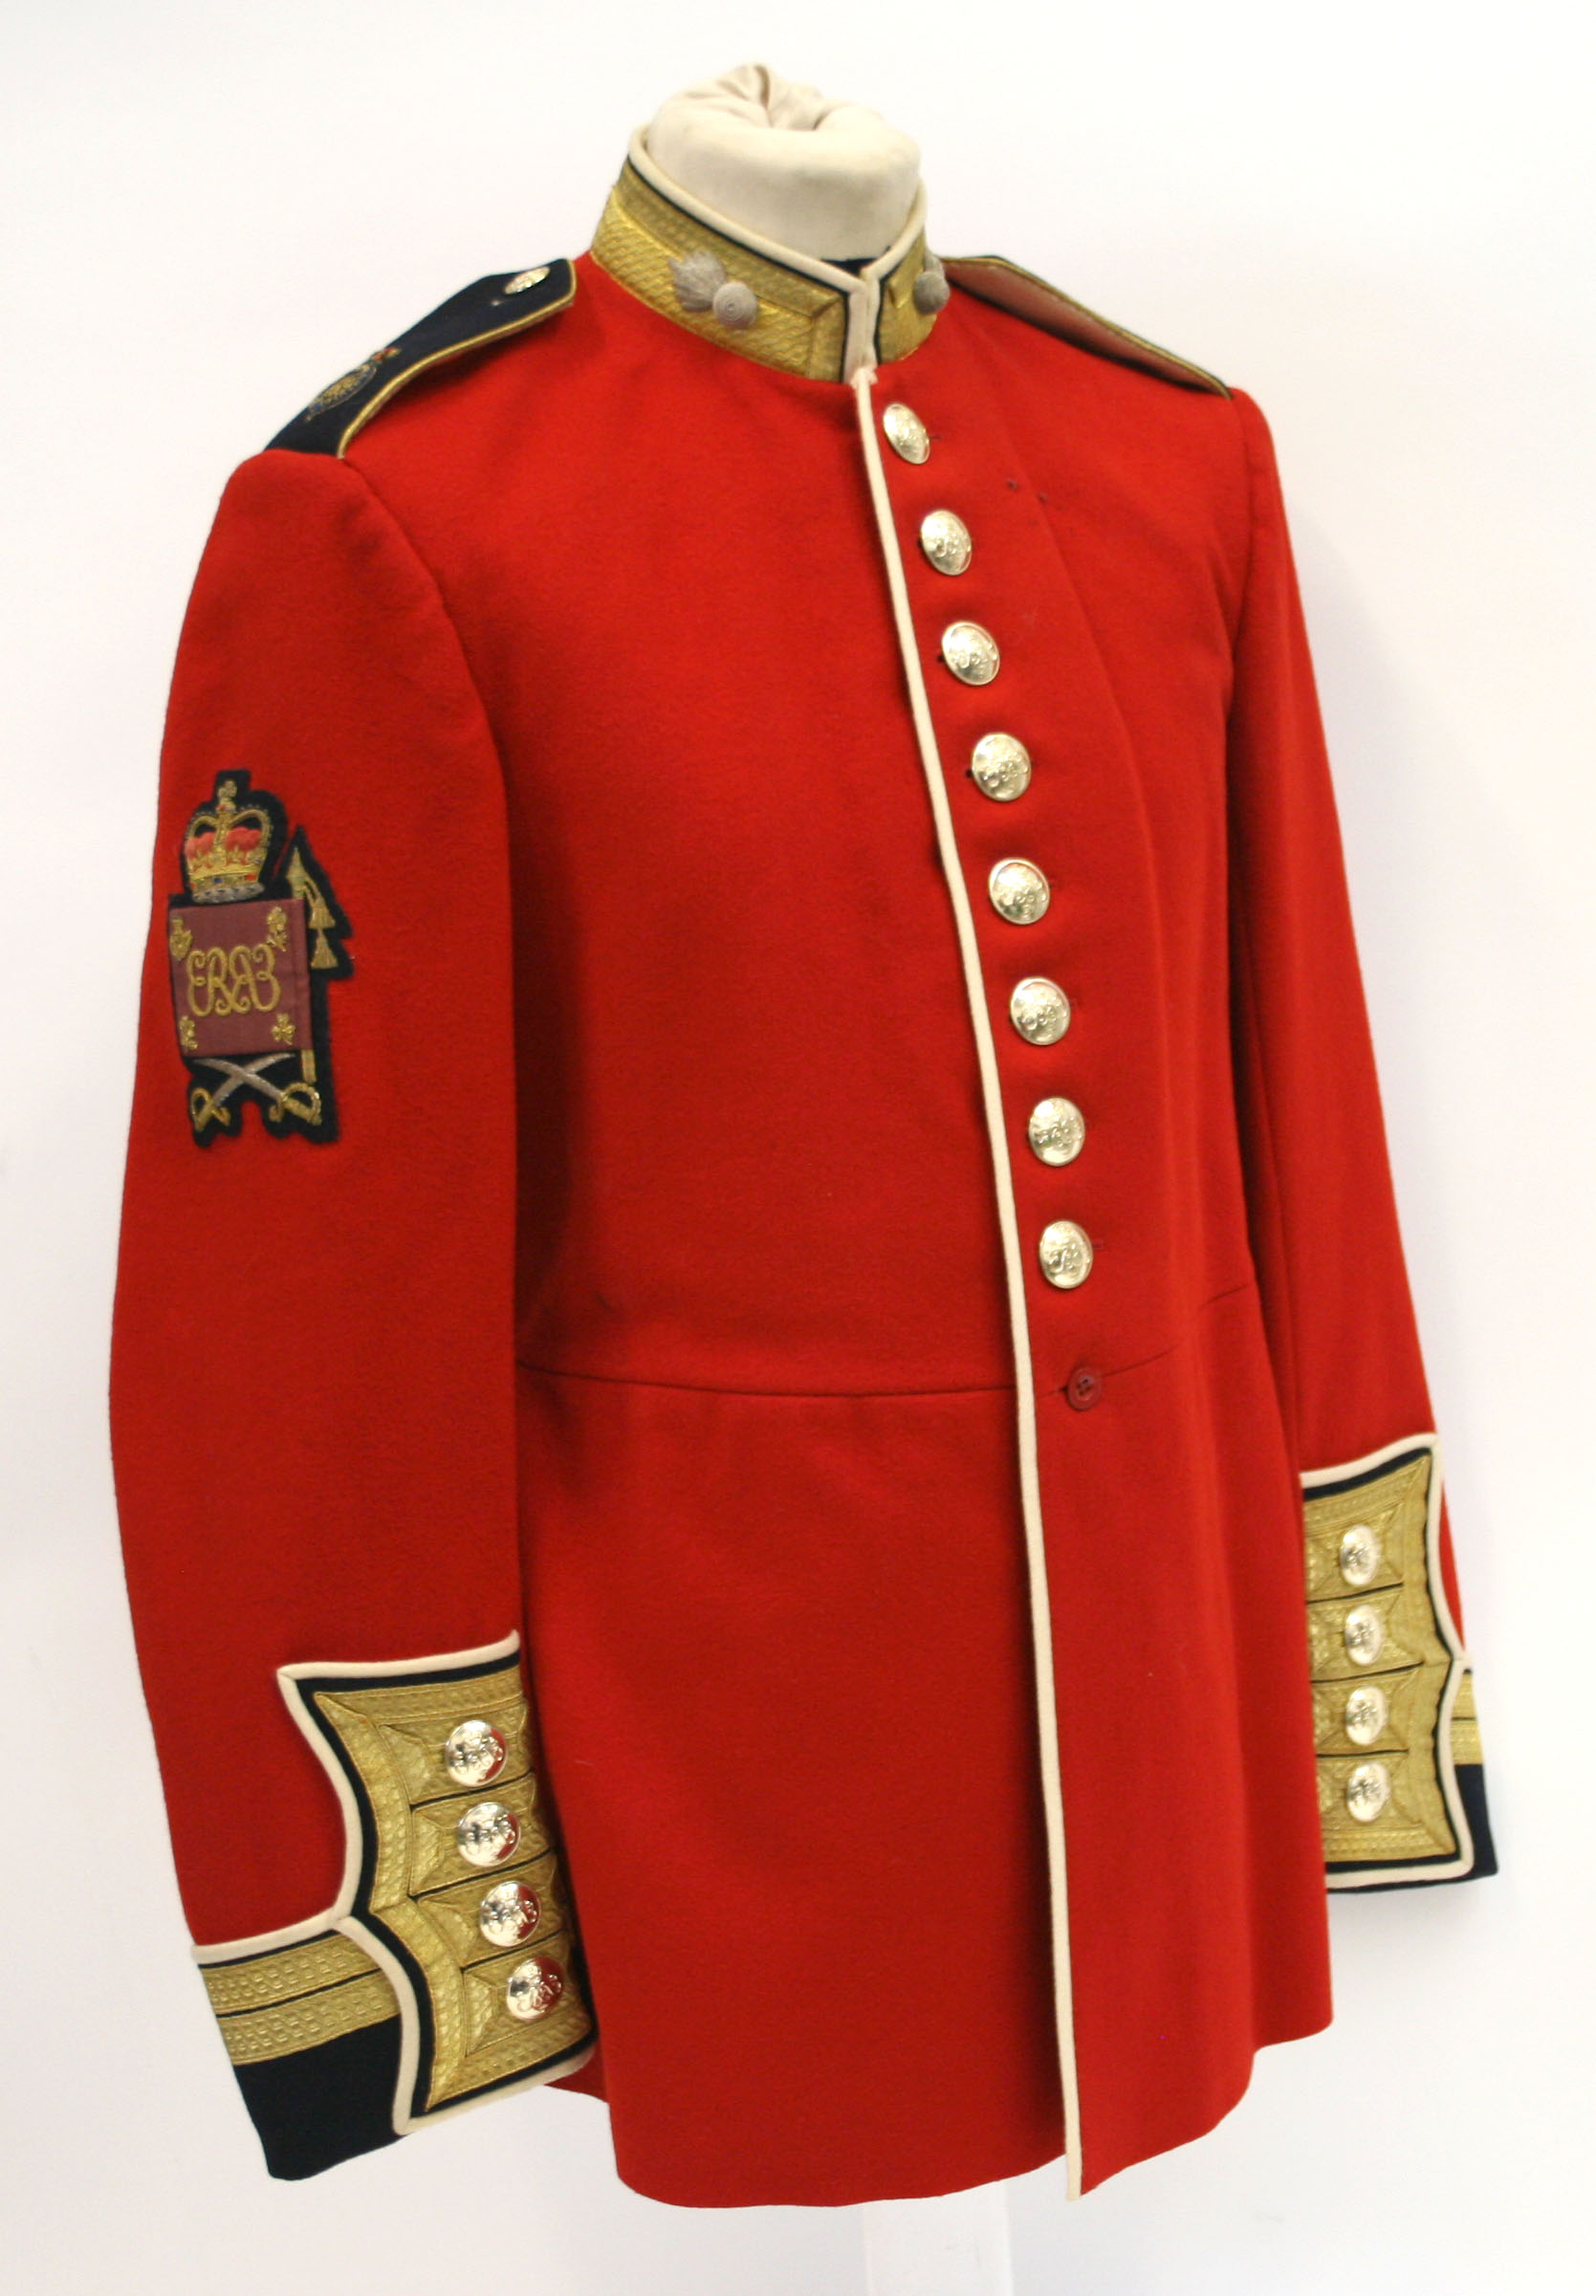 Post 1953 Grenadier Guards Colour Sergeants / Warrant Officers Dress Tunic of fine red cloth with - Image 2 of 5